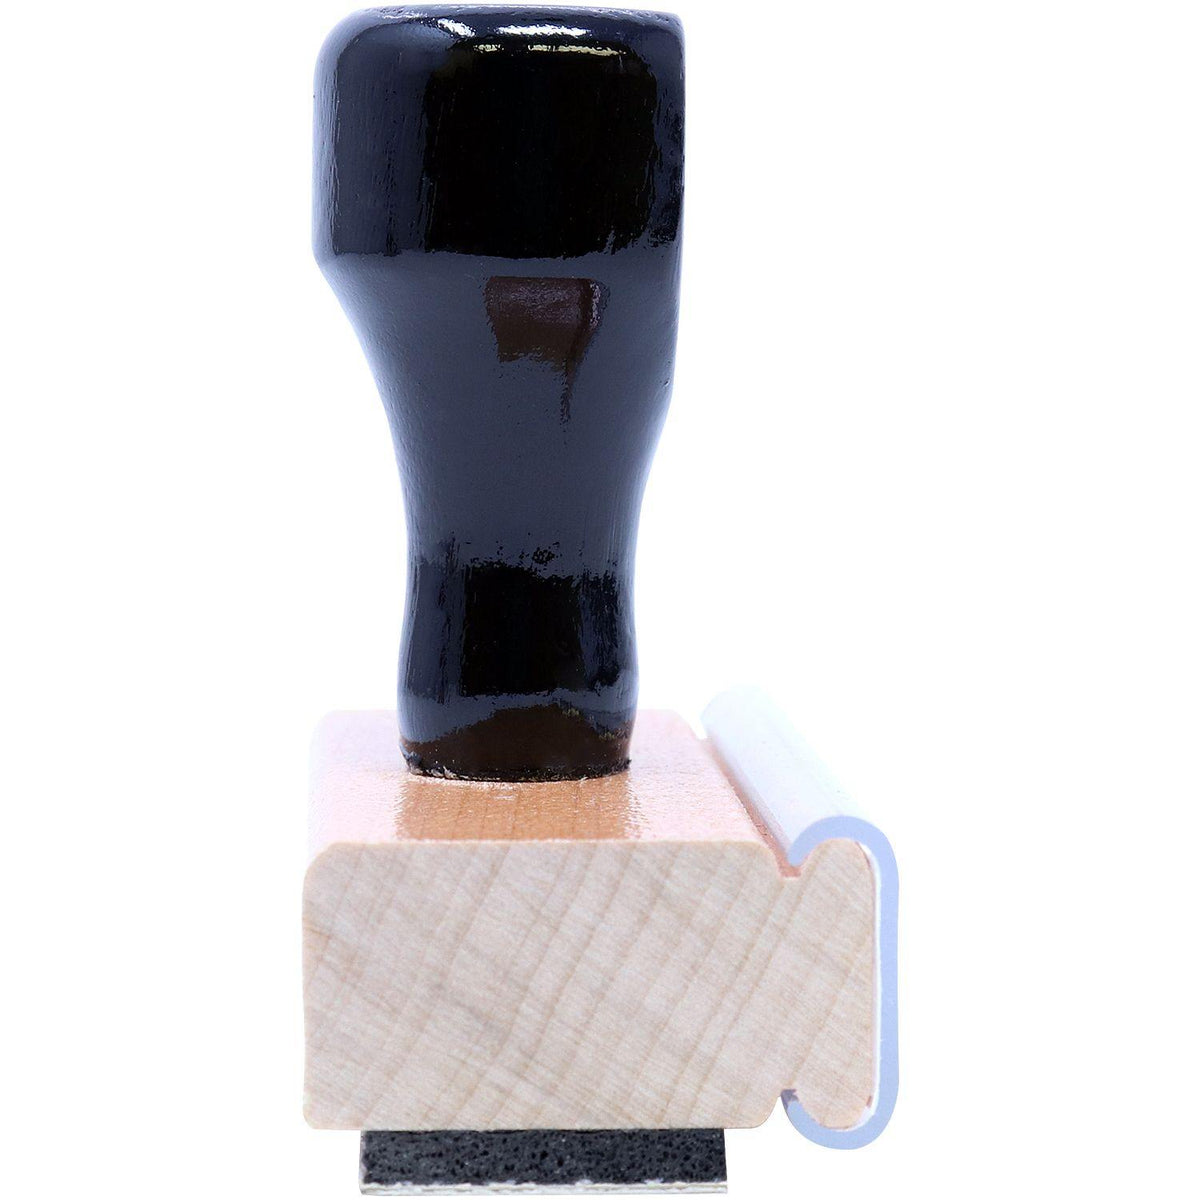 Side View of Large Client Copy Rubber Stamp